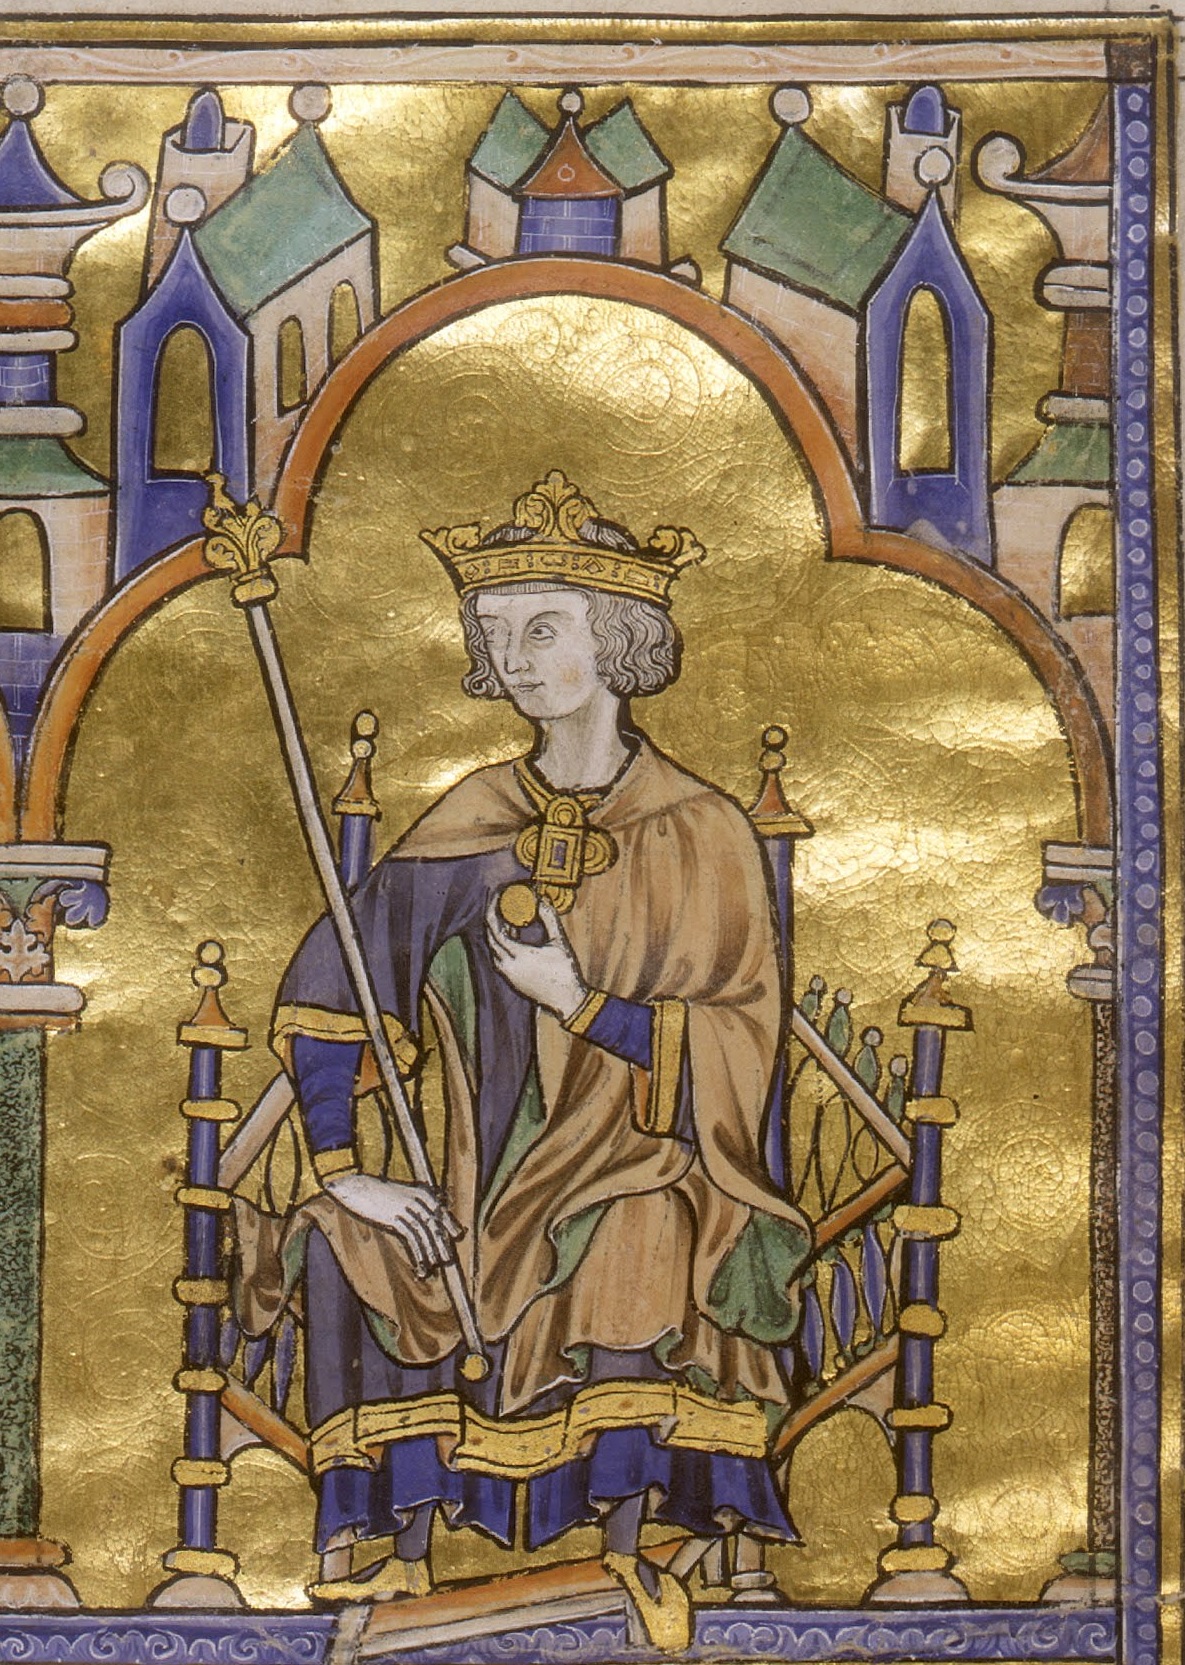 St King Louis IX (Quote w/out filter) by TradRaider on DeviantArt